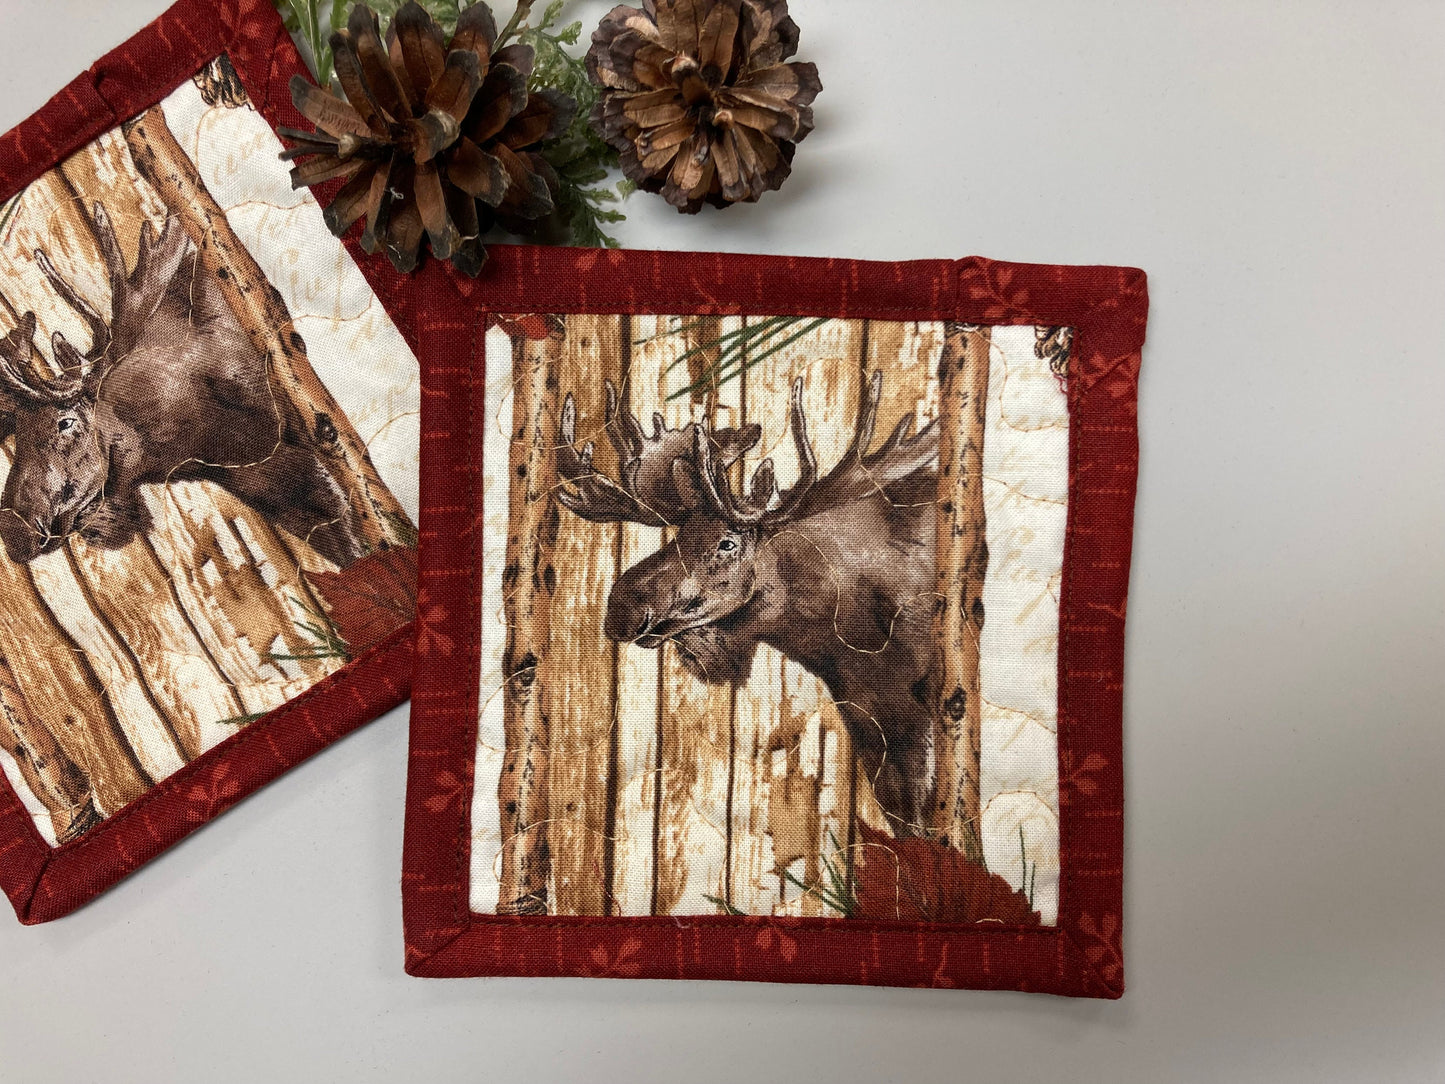 Fall Moose Head Mancave Mug Rug Snack Mats 5x5" Large Fabric Hot Cold Coasters Washable Table, Everyday Cabin Rustic Lodge Hunting Animal